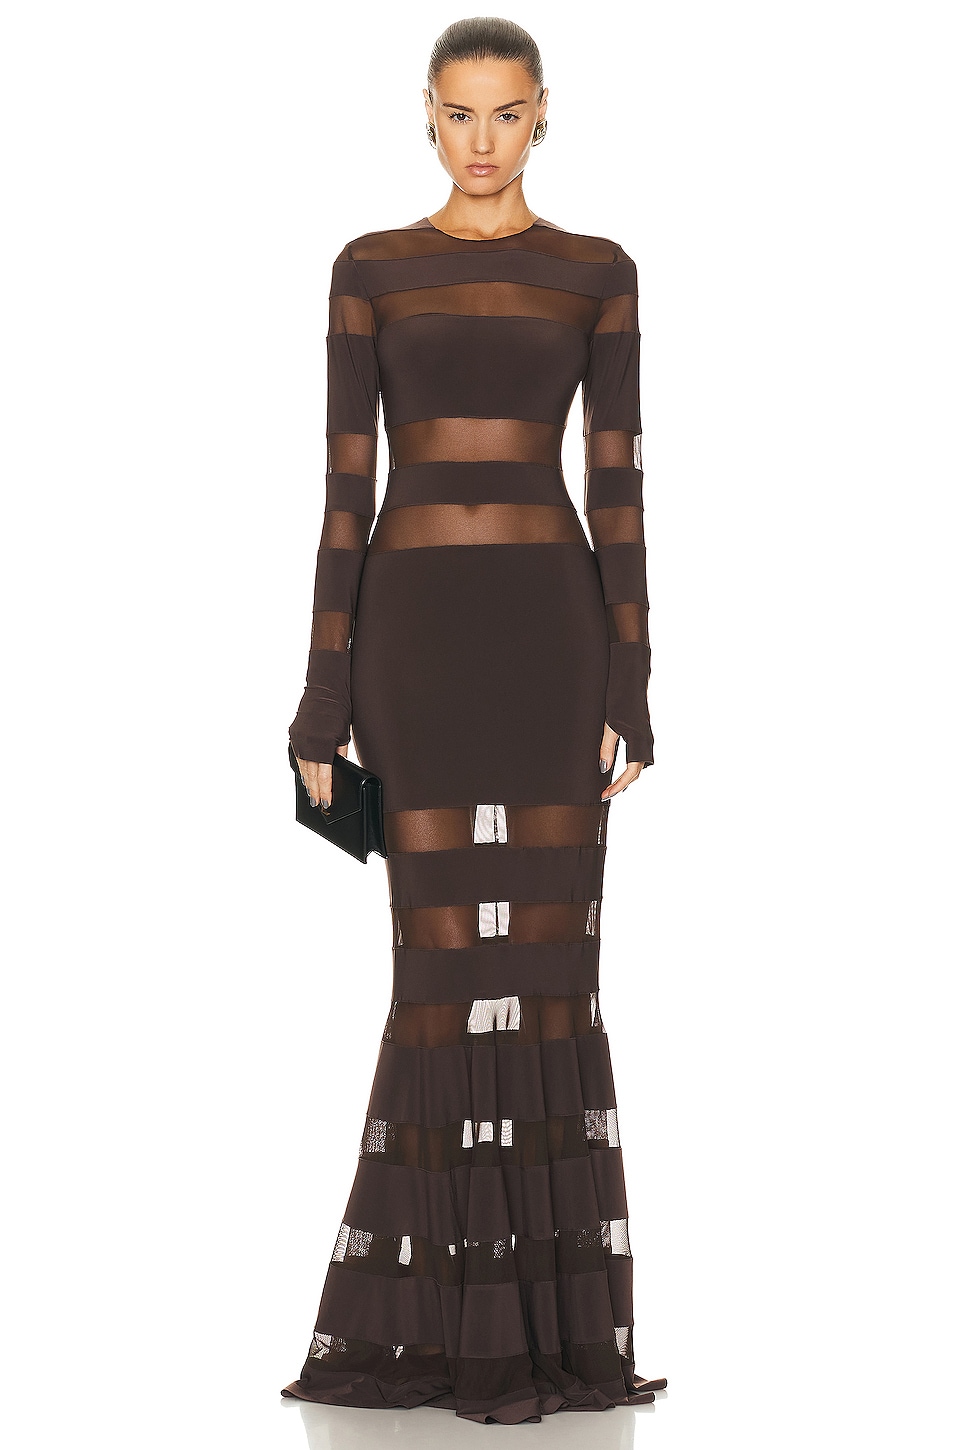 Image 1 of Norma Kamali Spliced Dress Fishtail Gown in Chocolate & Chocolate Mesh